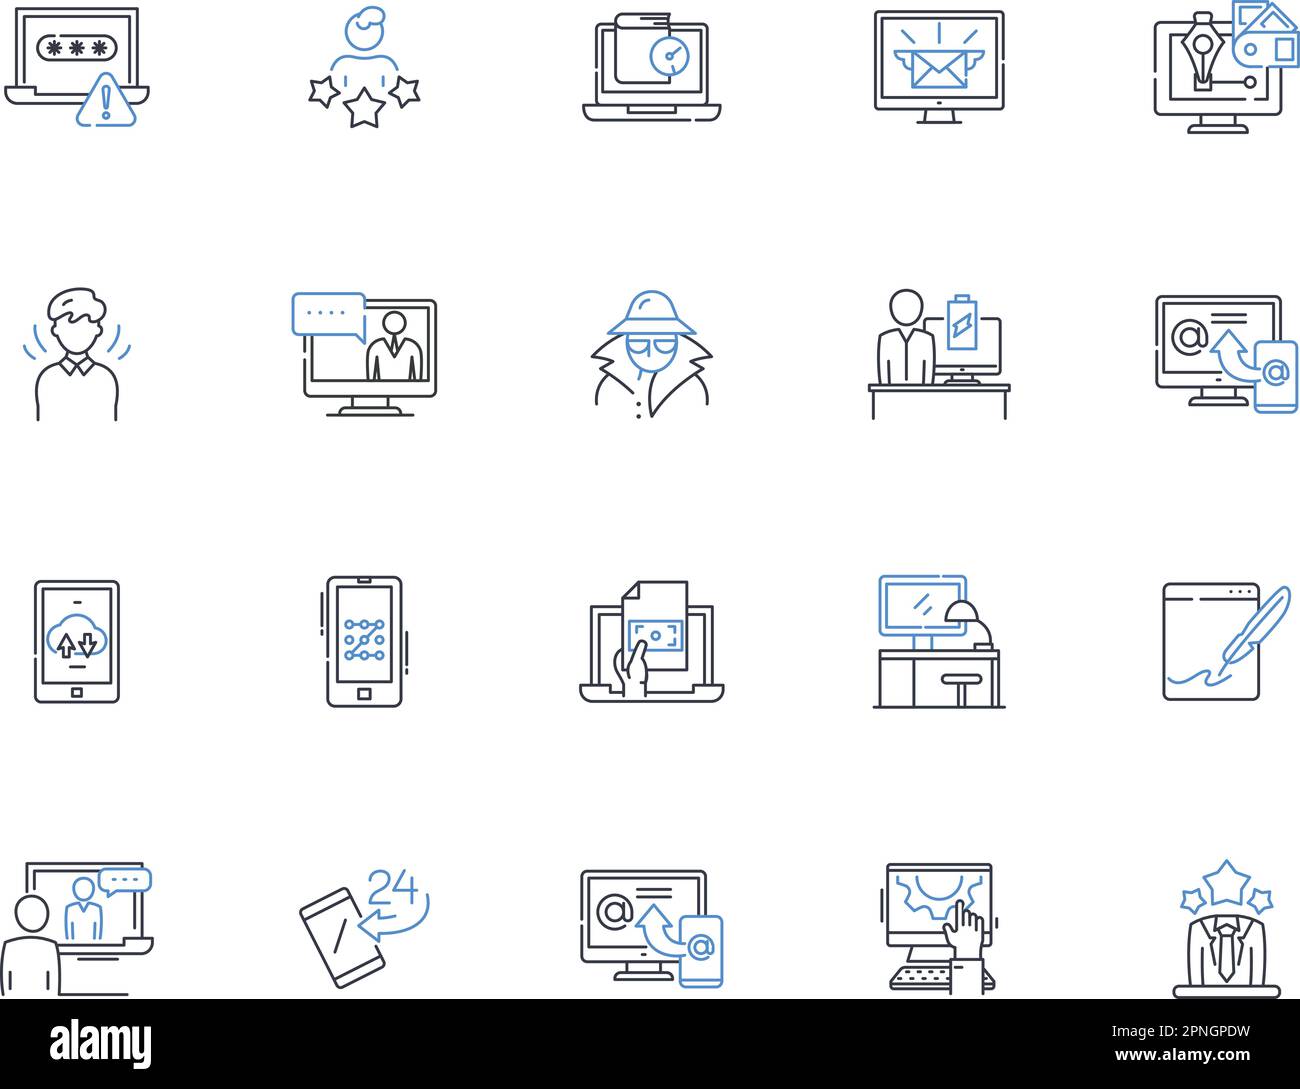 Tax Account line icons collection. Deductions, Filing, Returns, Refunds, Compliance, Audit, Accounting vector and linear illustration. Liability Stock Vector